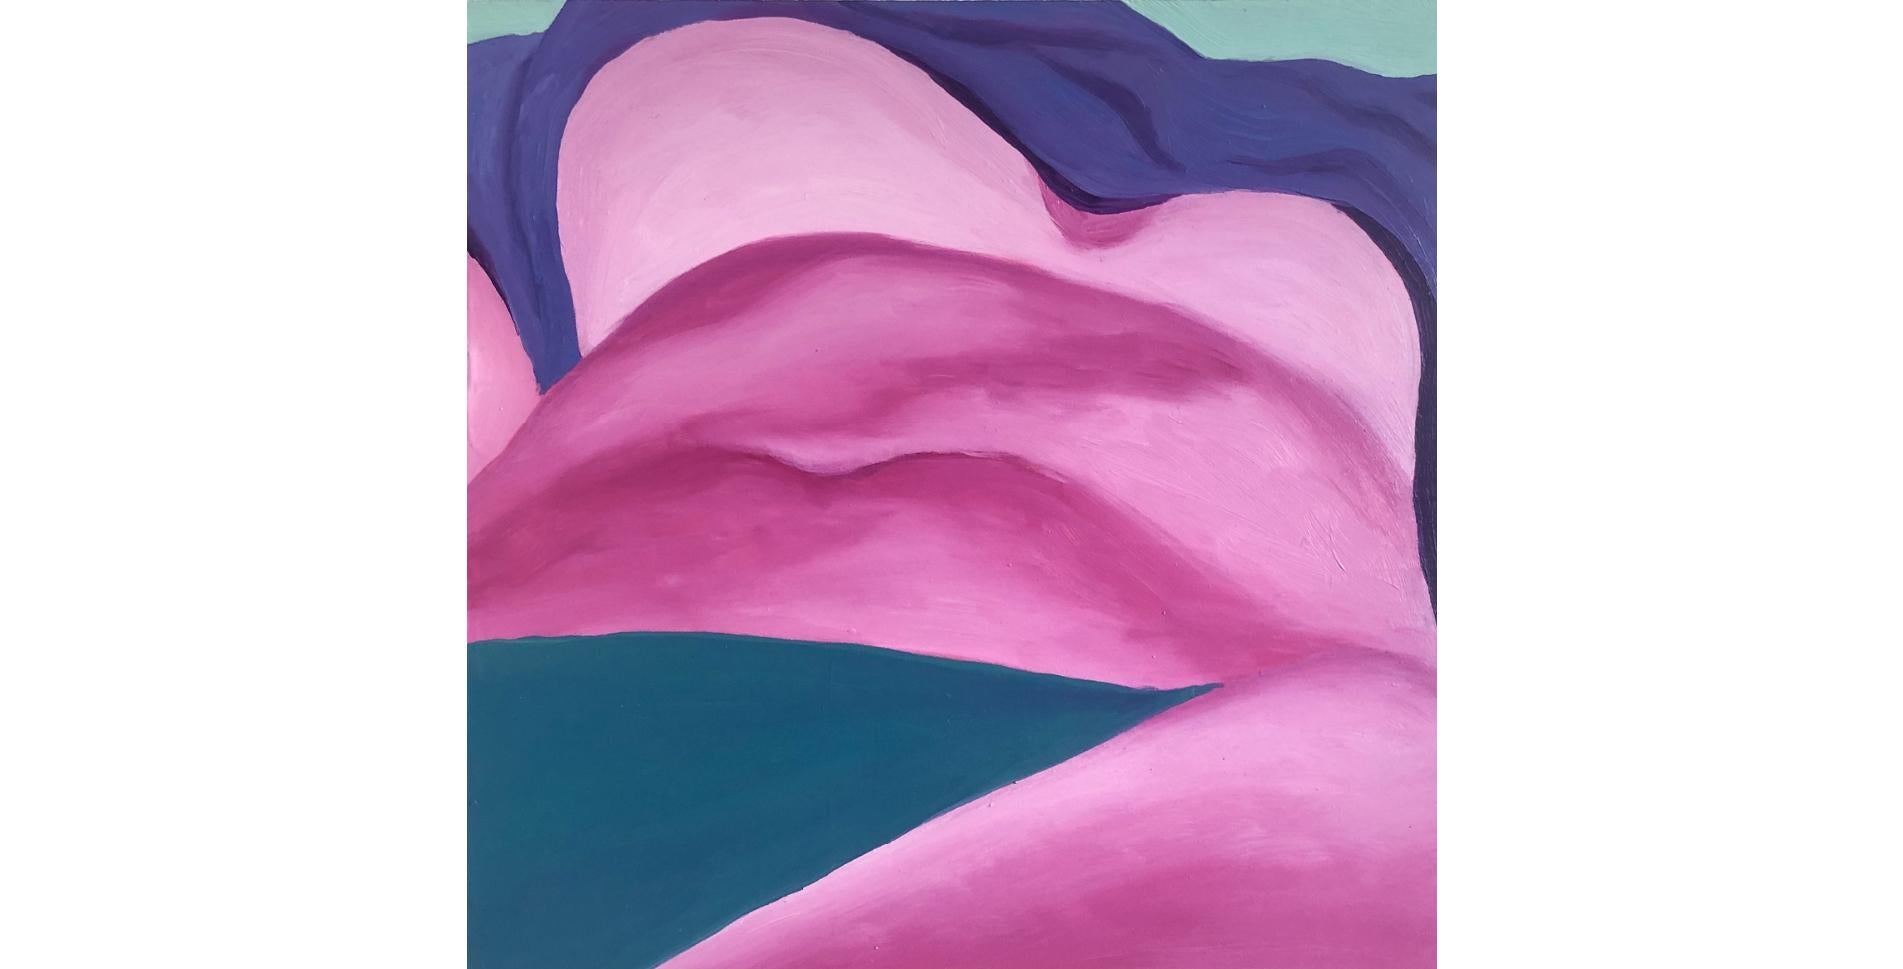 Slope, Oil painting on wood panel, 2021, figurative nude portrait in pink - Painting by Jessica Rubin